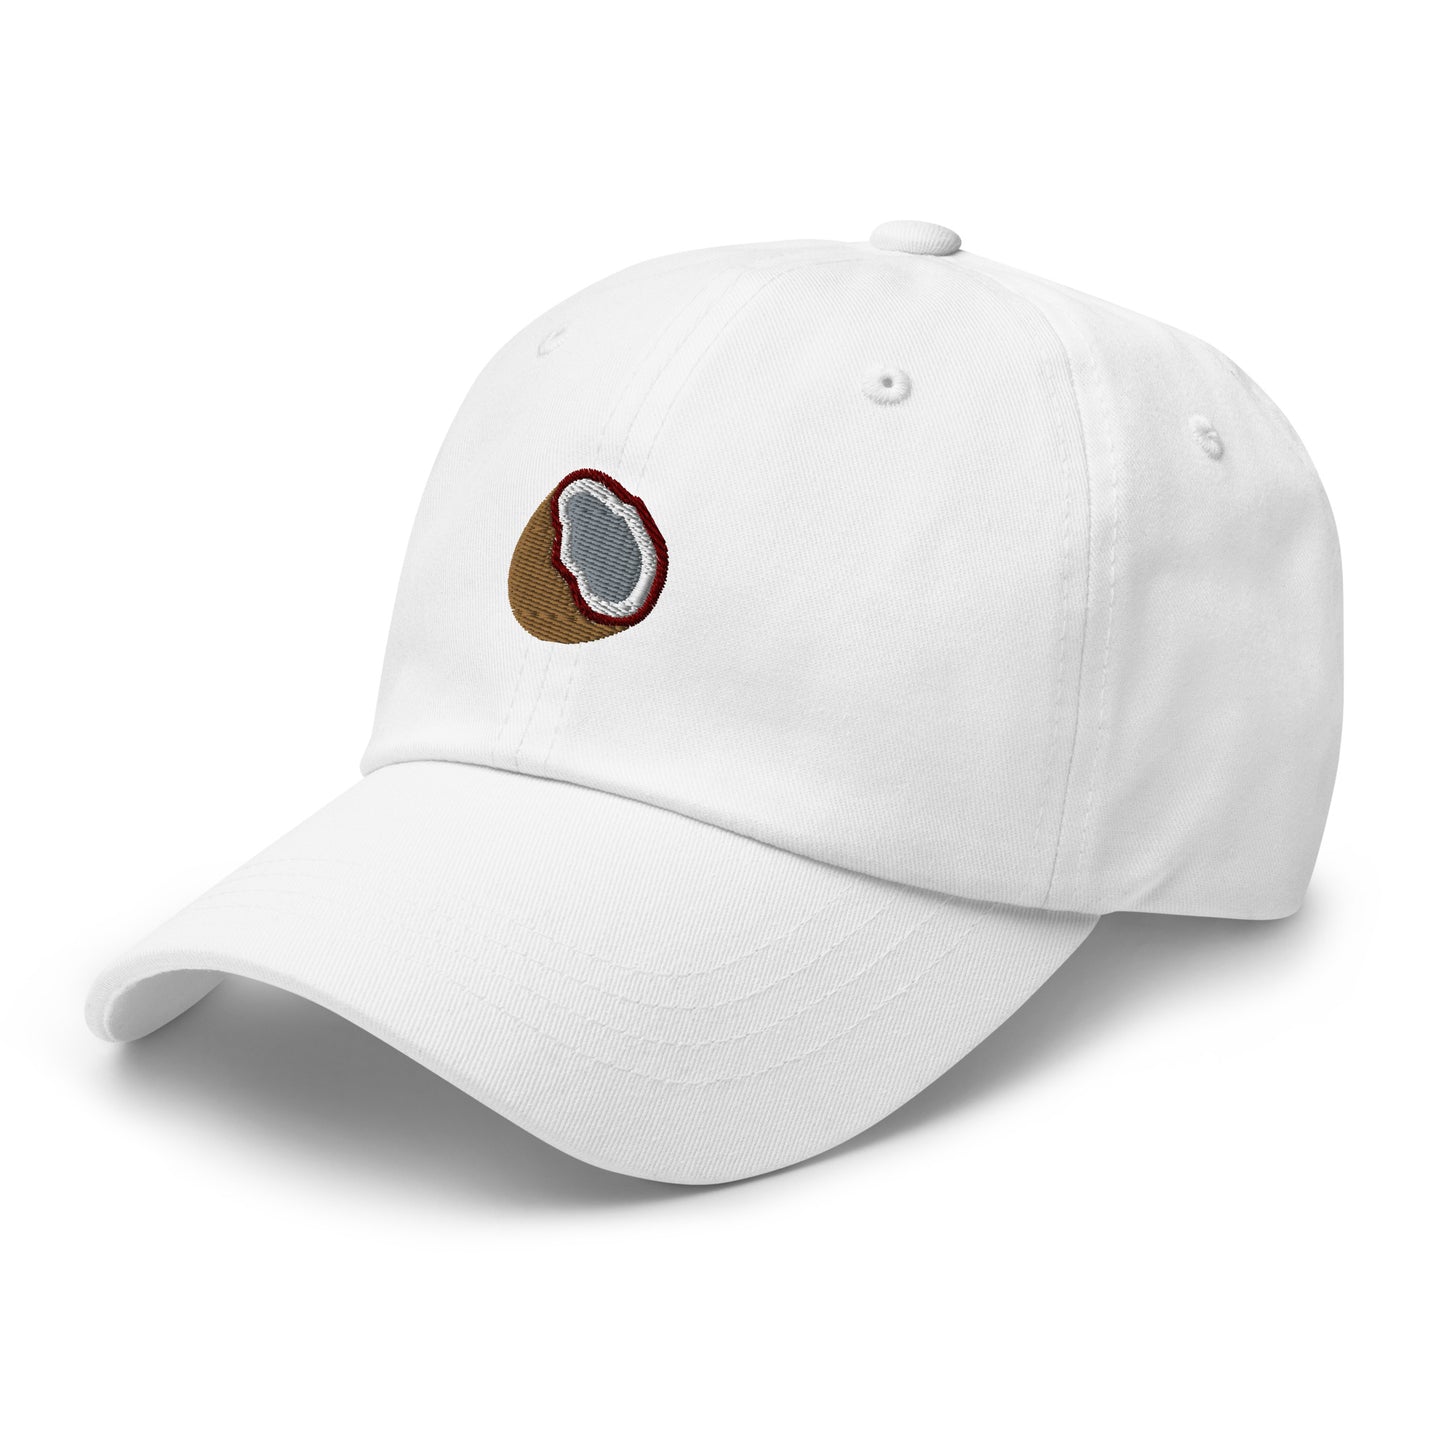 Coconut Embroidered Baseball Cap